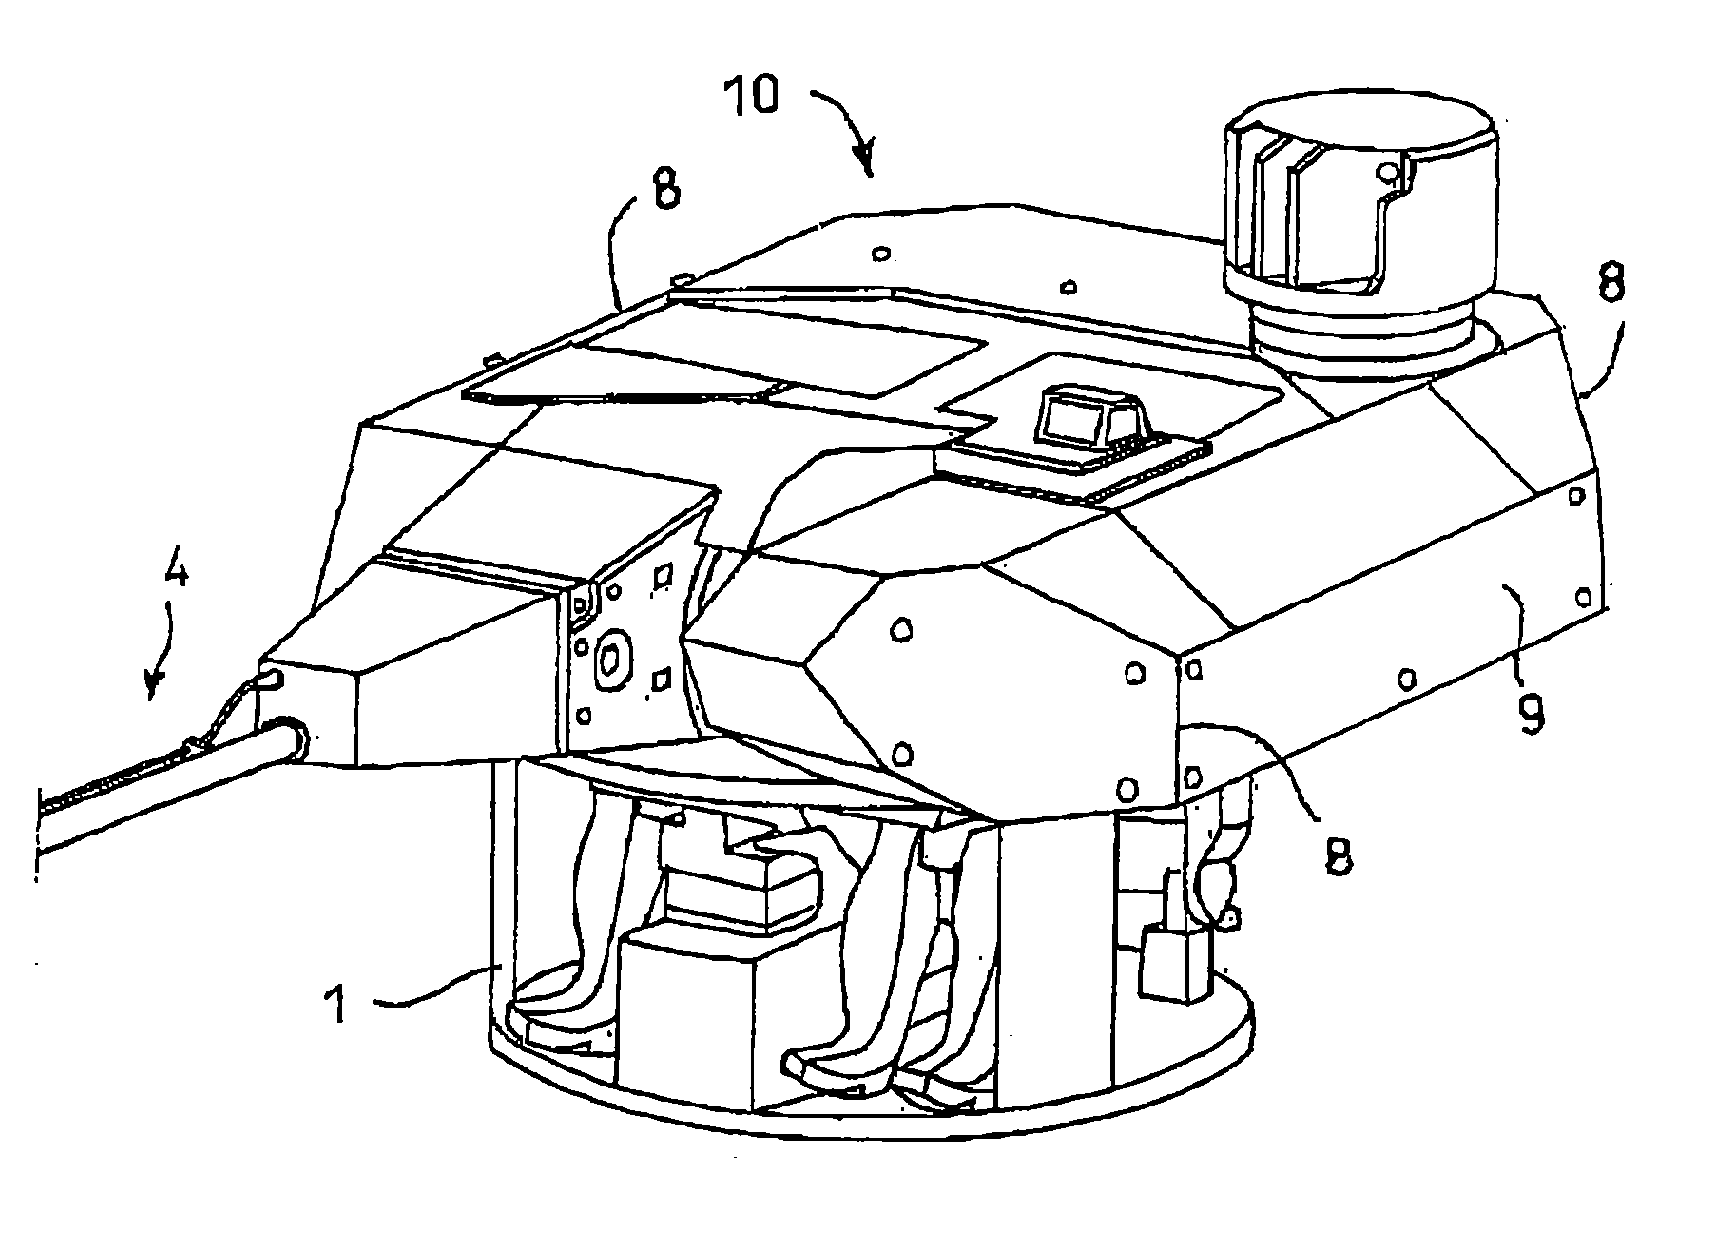 Modular, adaptable ballistic protective construction in particular for a weapons turret